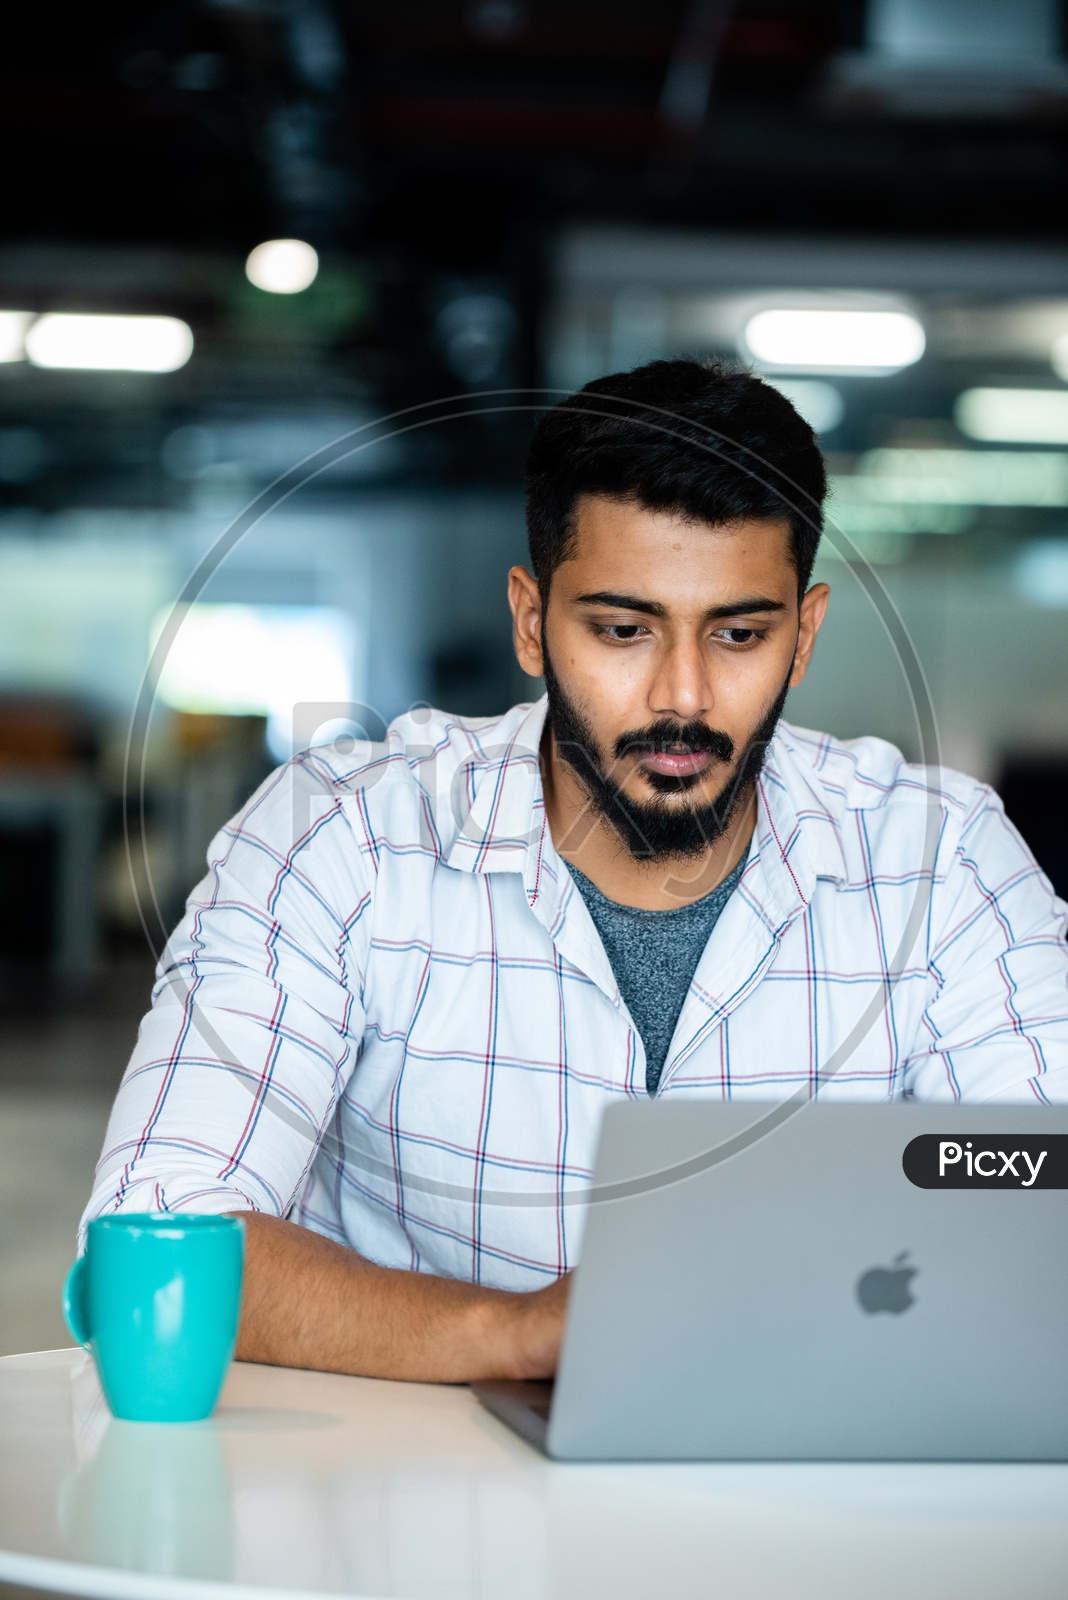 Focused Serious Working Indian Professional Employee  Young Man  On Laptop In Office Work Space